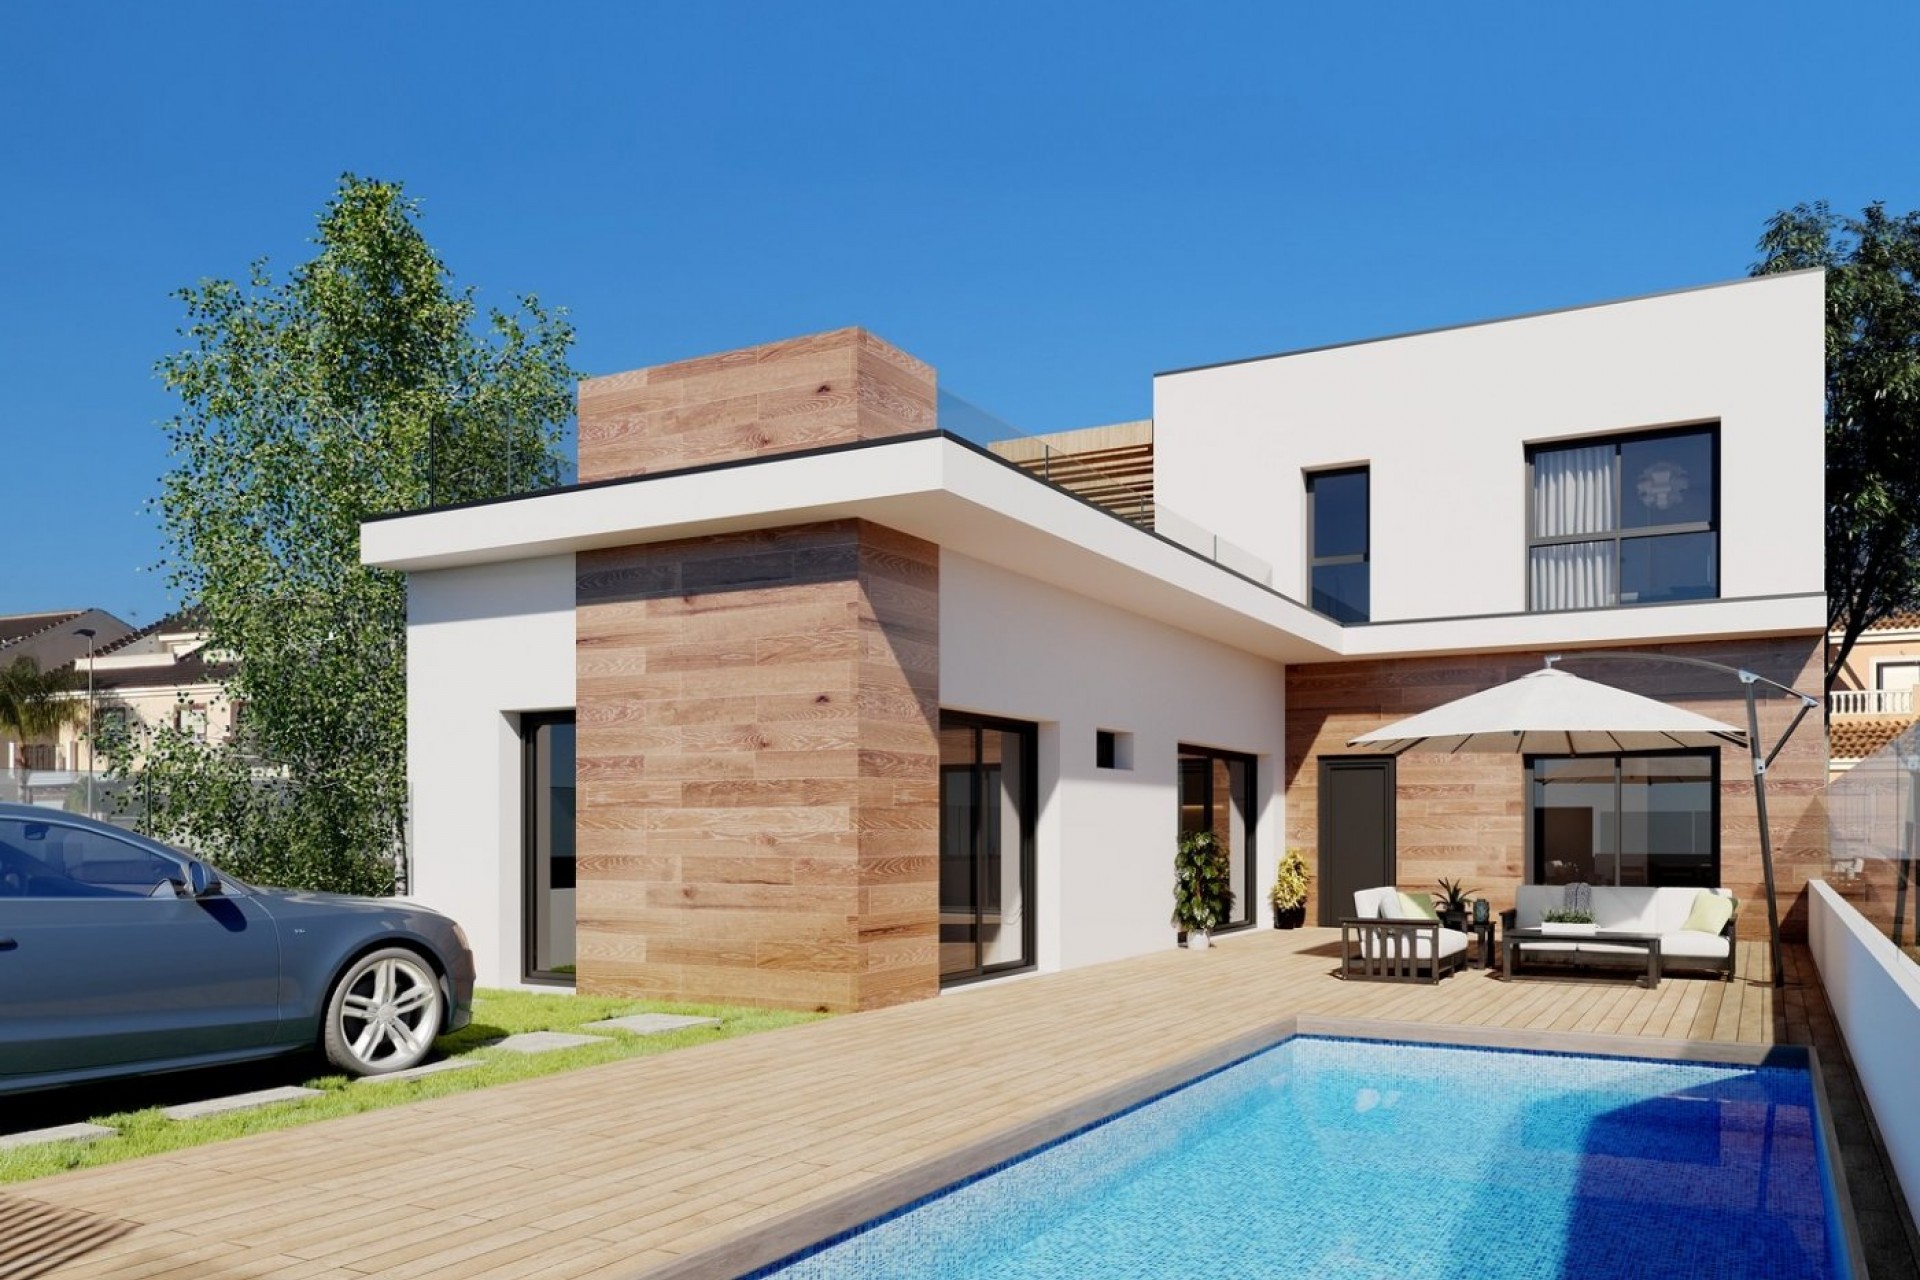 New Build - Town house -
San Javier